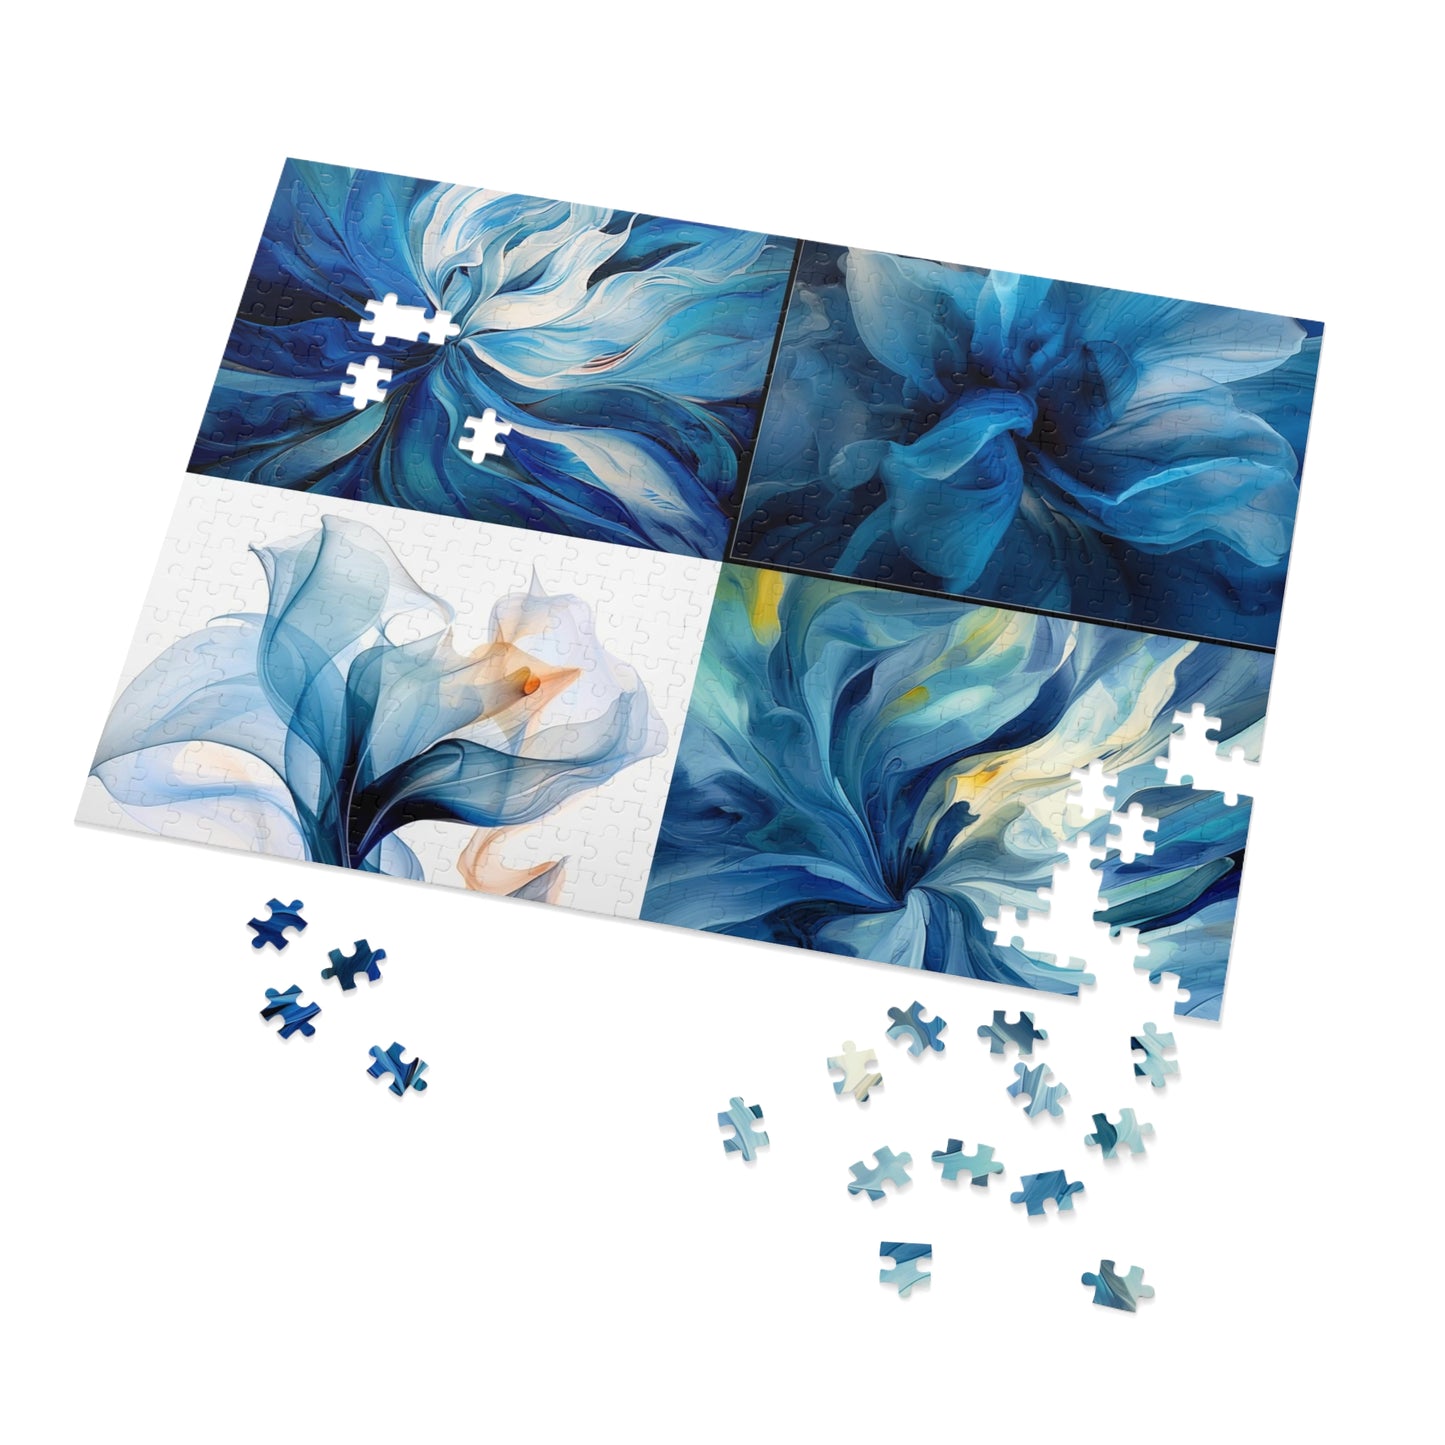 Jigsaw Puzzle (30, 110, 252, 500,1000-Piece) Blue Tluip Abstract 5